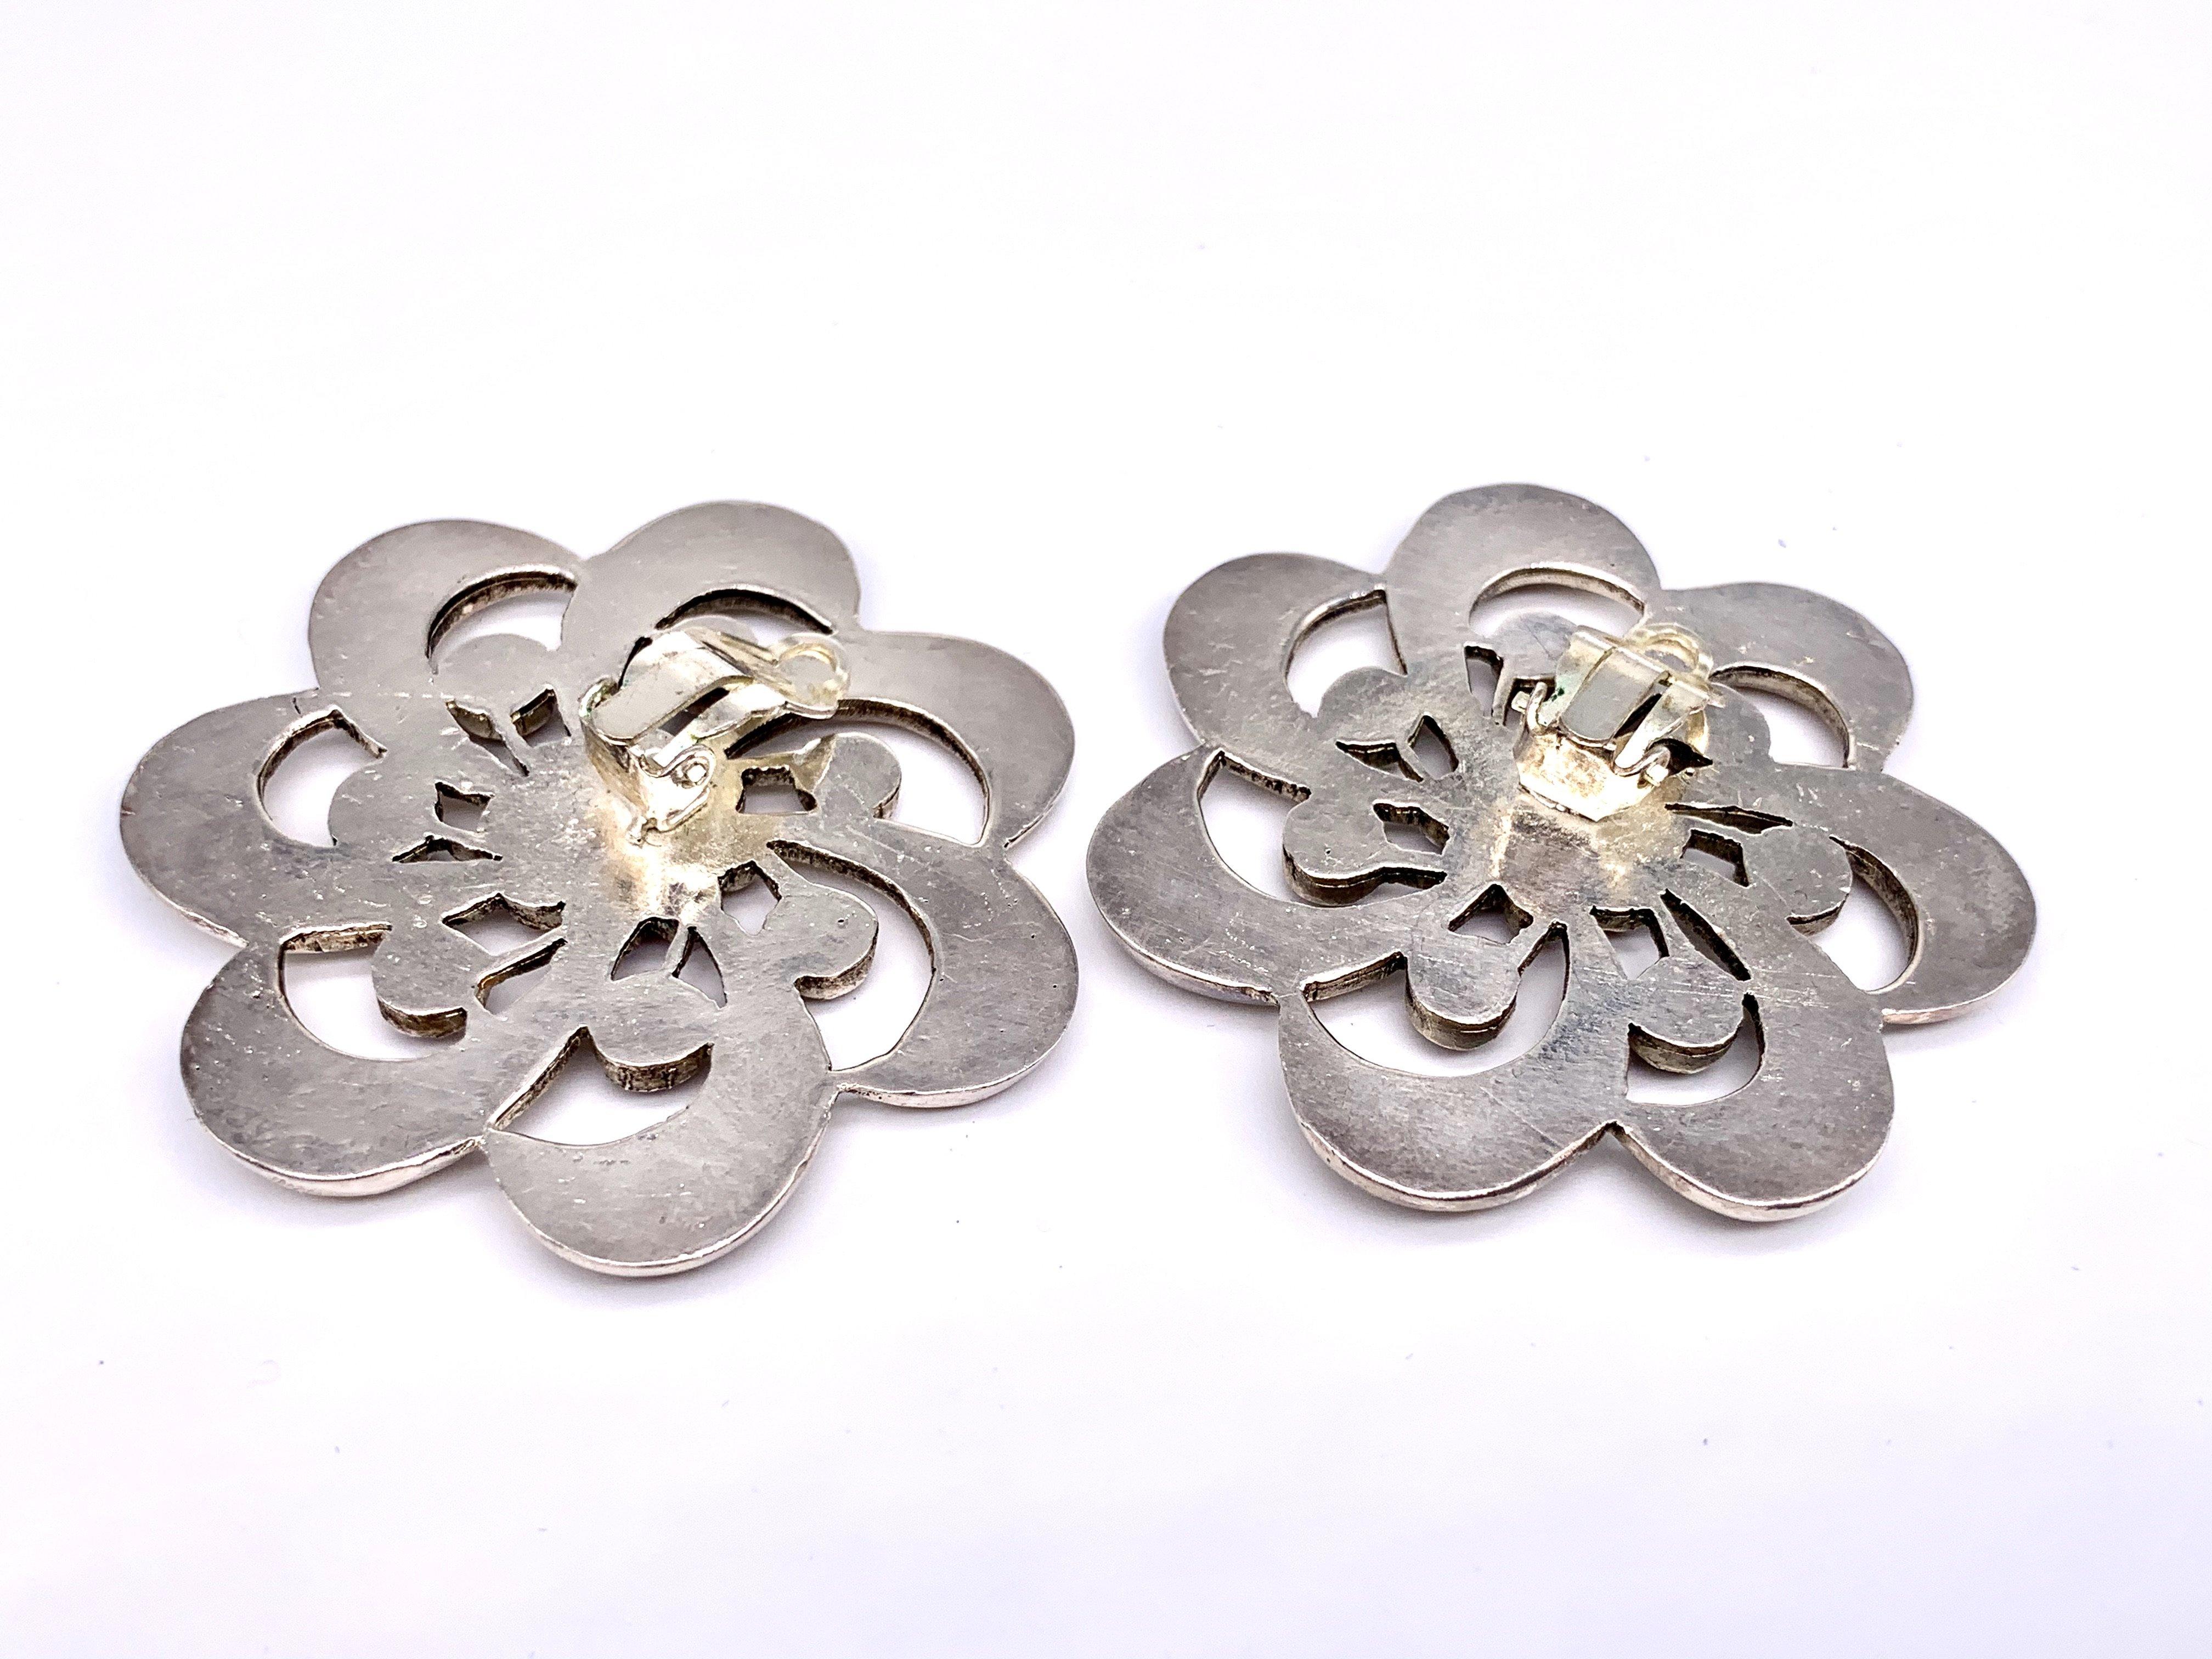 KARL LAGERFELD Earrings 1990s Vintage In Excellent Condition For Sale In London, GB